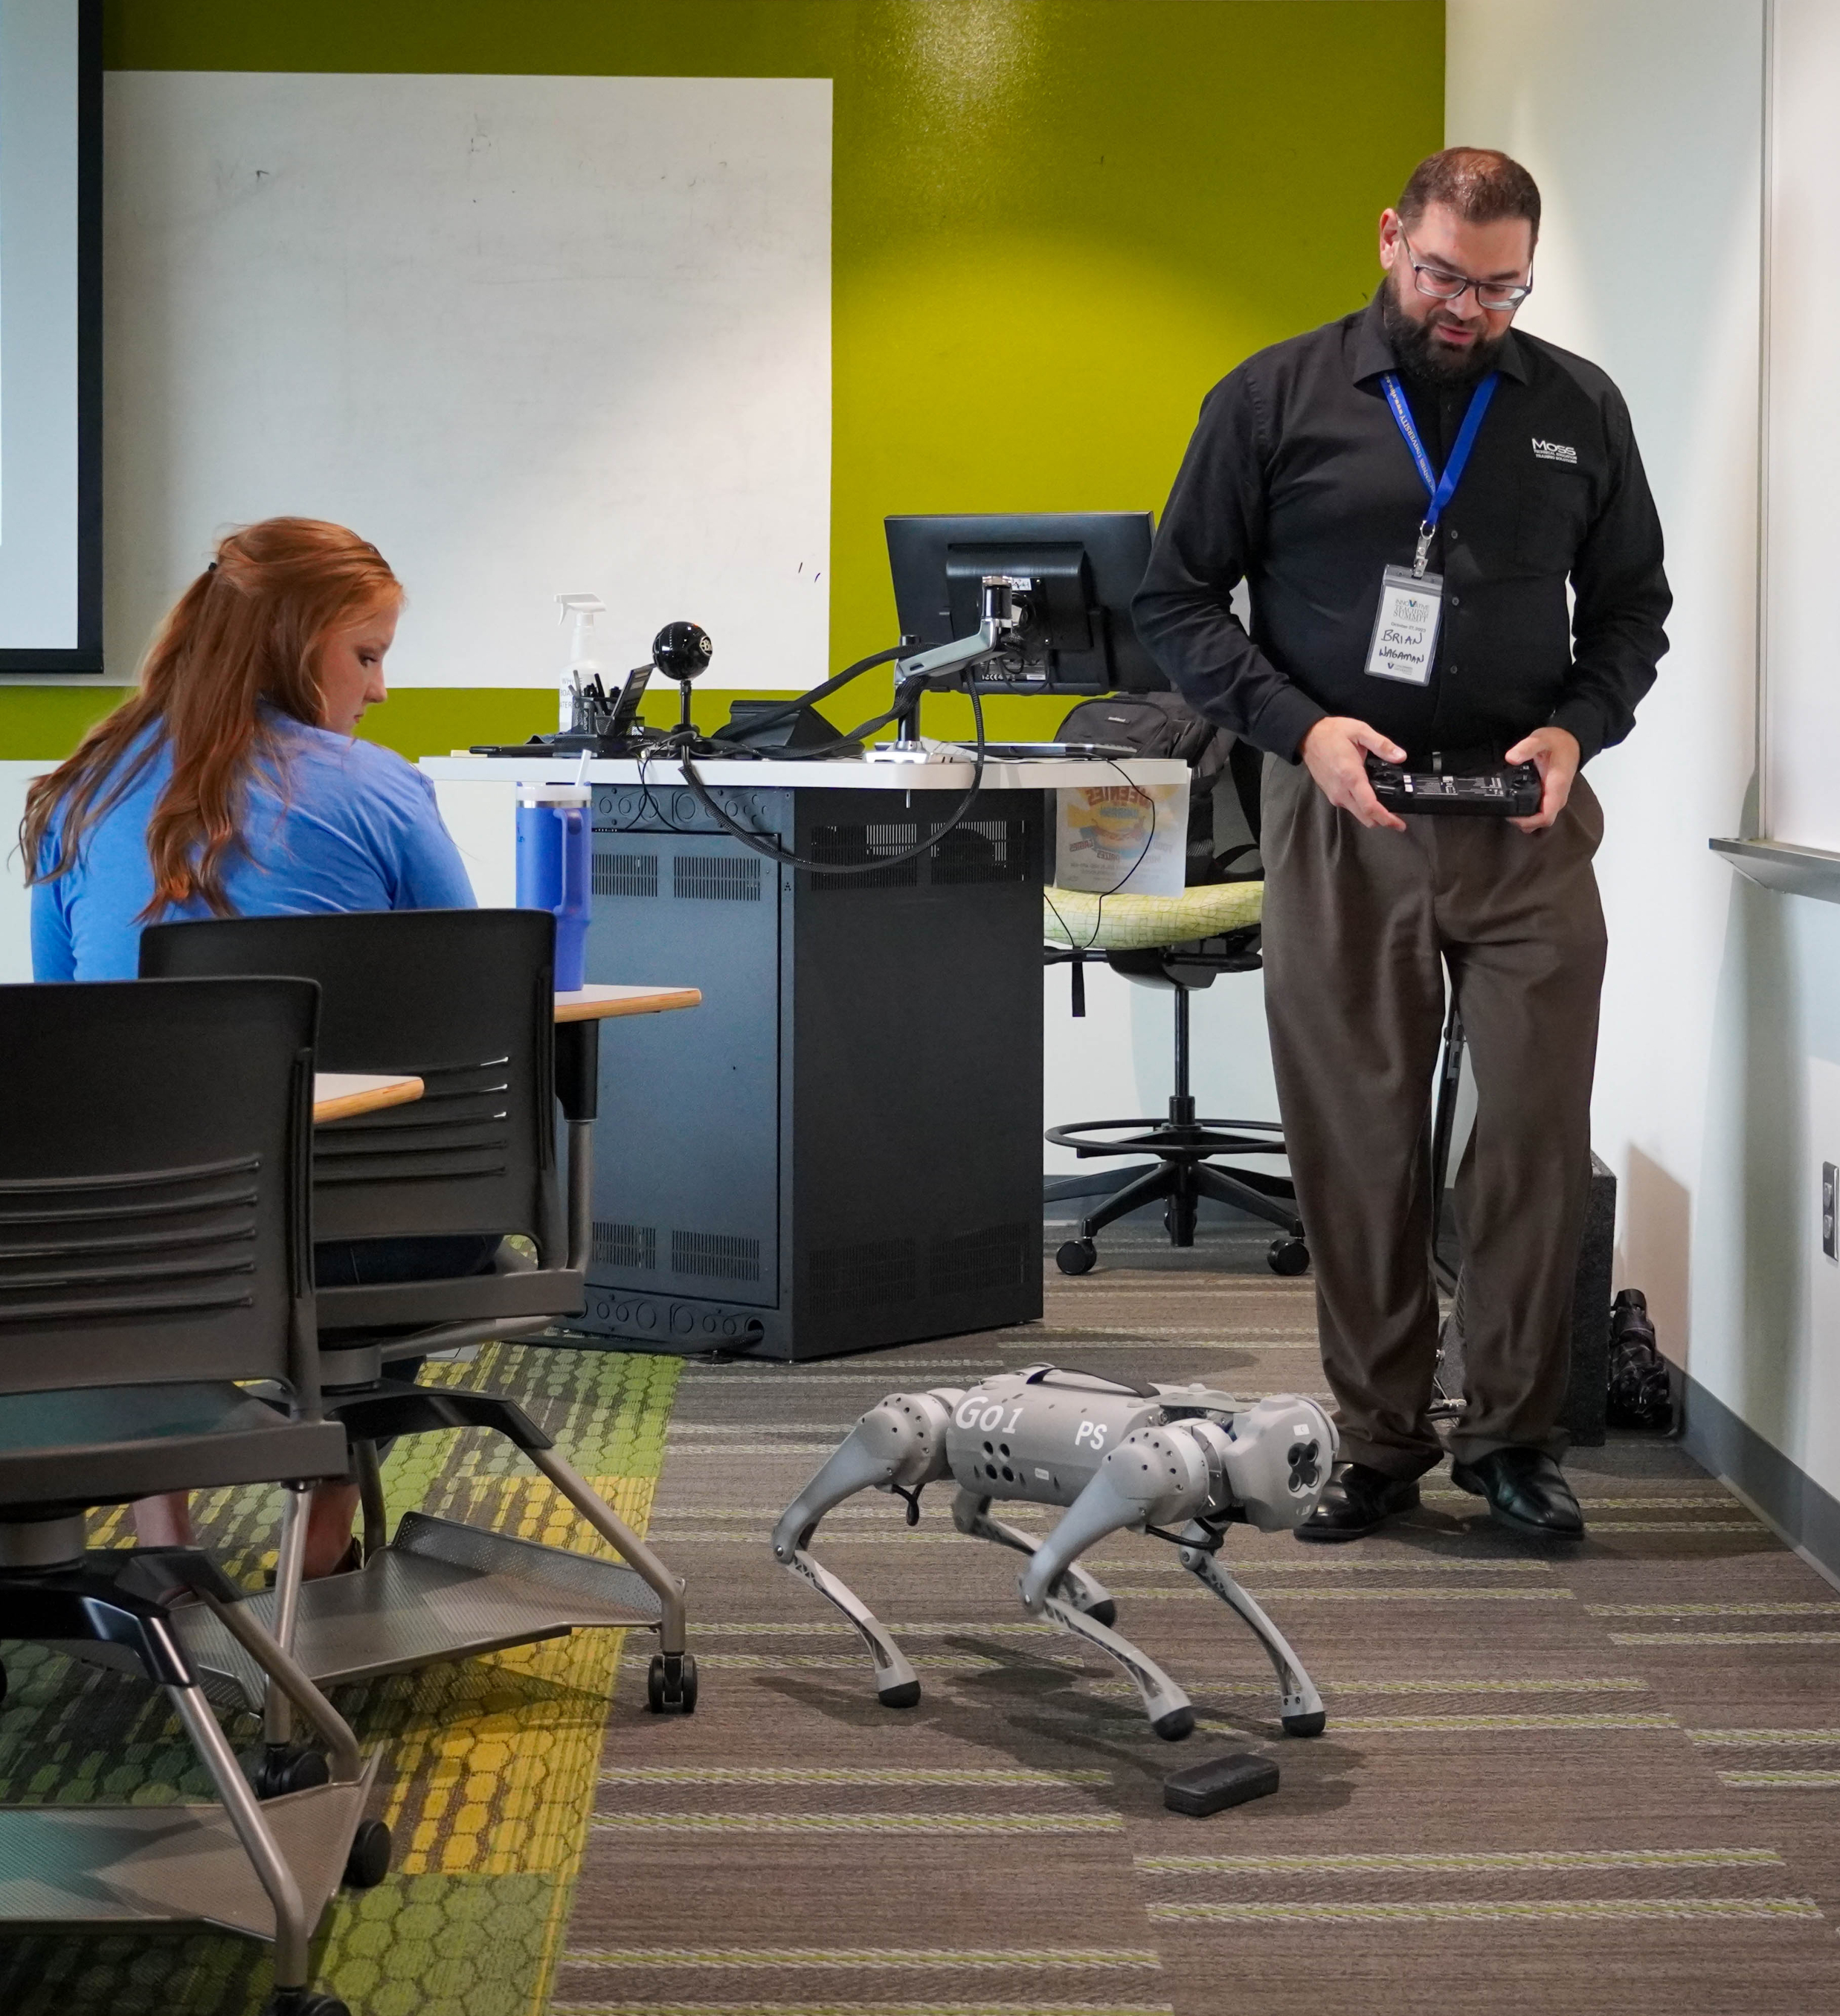 A male operates a robot dog in a VU classroom as a woman looks on.